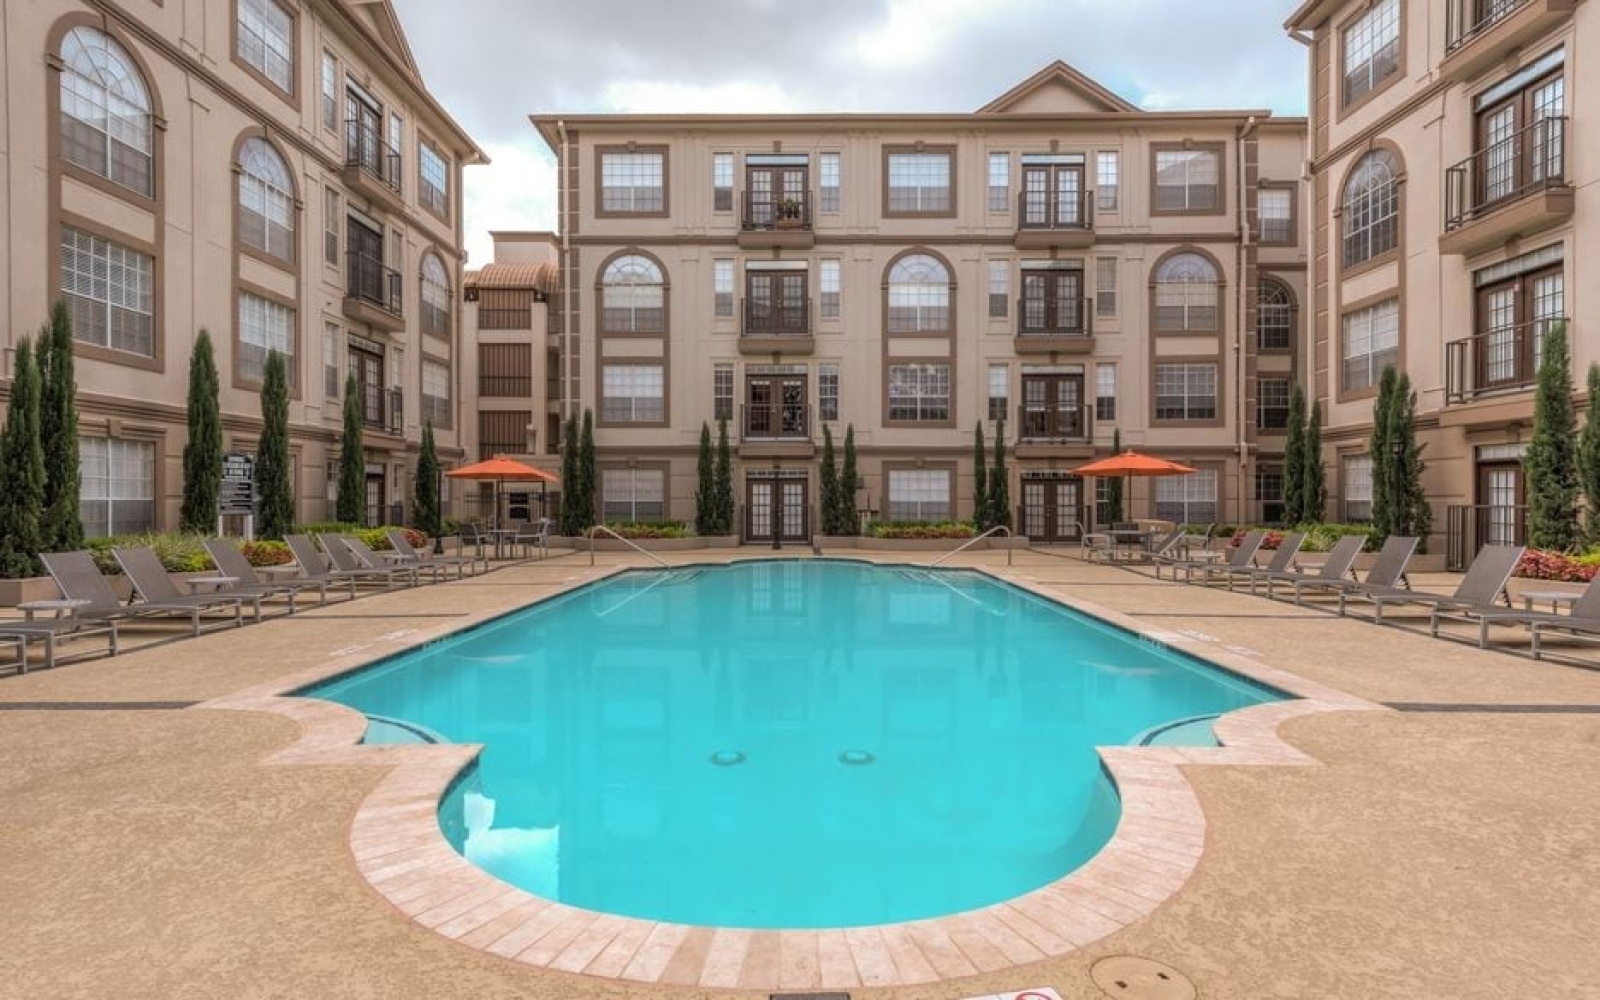 5800 Woodway Dr,Houston,77057,Apartment,Woodway Dr,2874